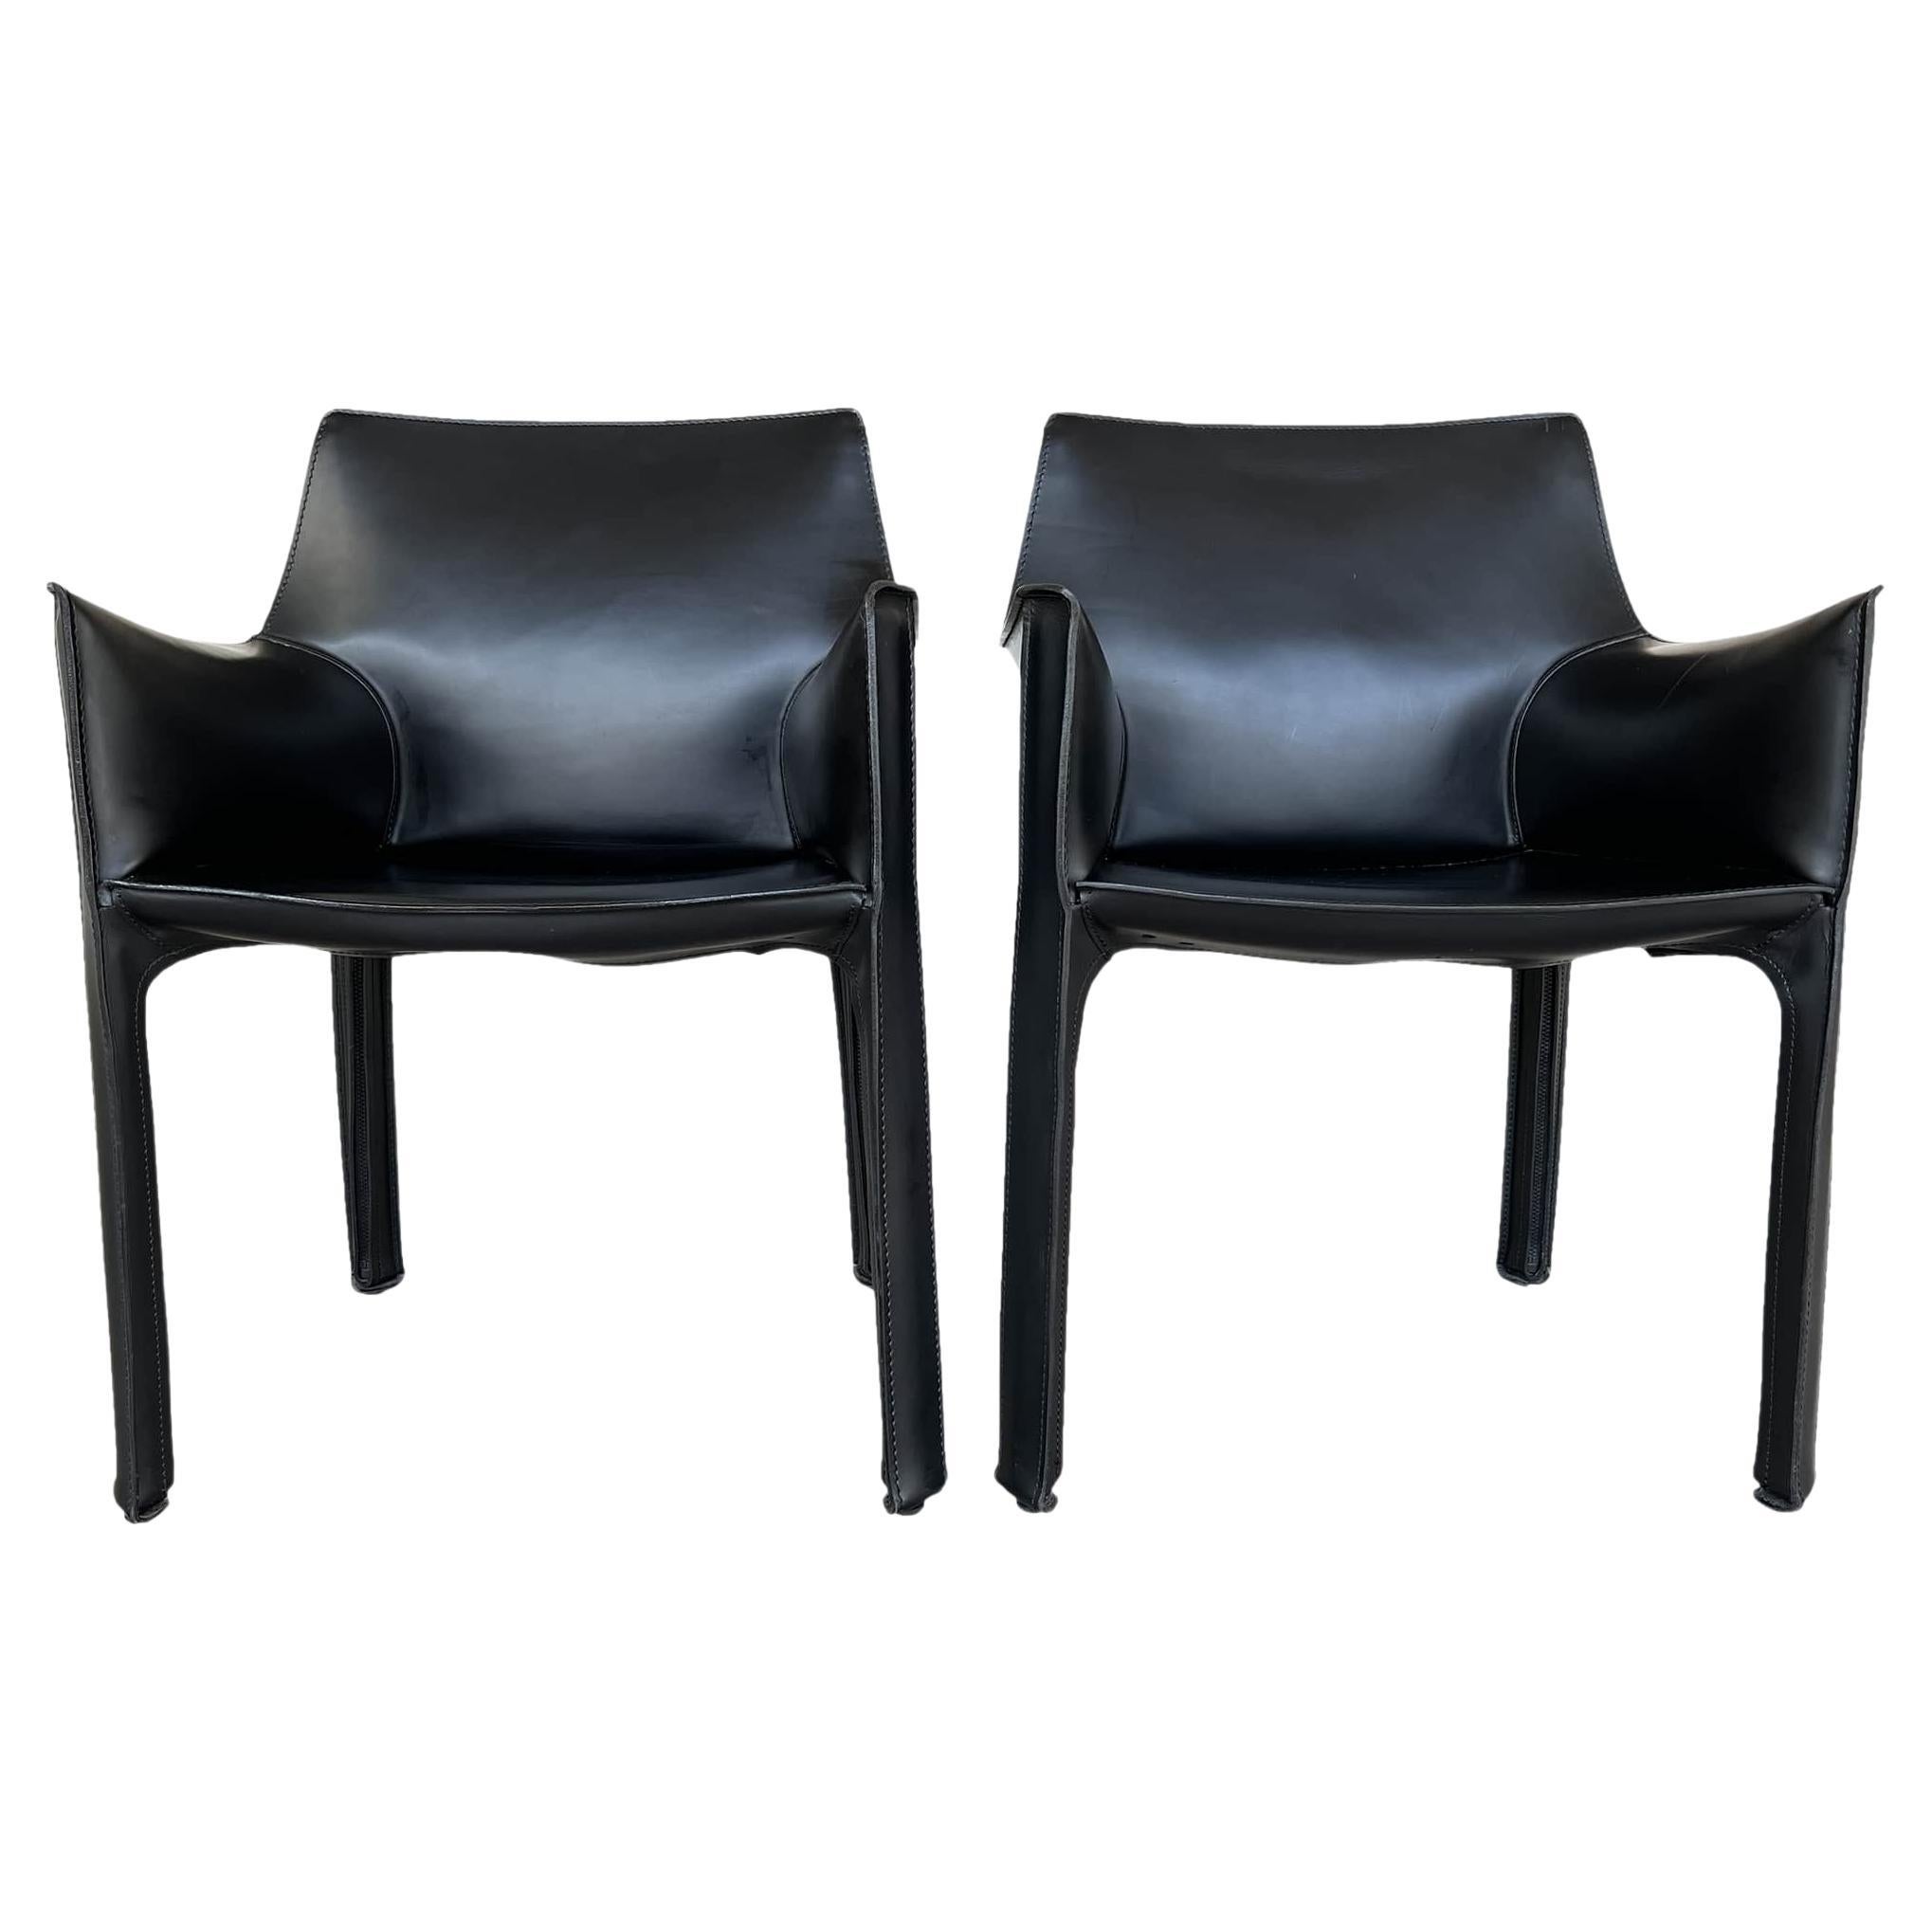 Cassina Y-2 Black Leather Lounge Armchairs Designed by Mario Bellini - a Pair